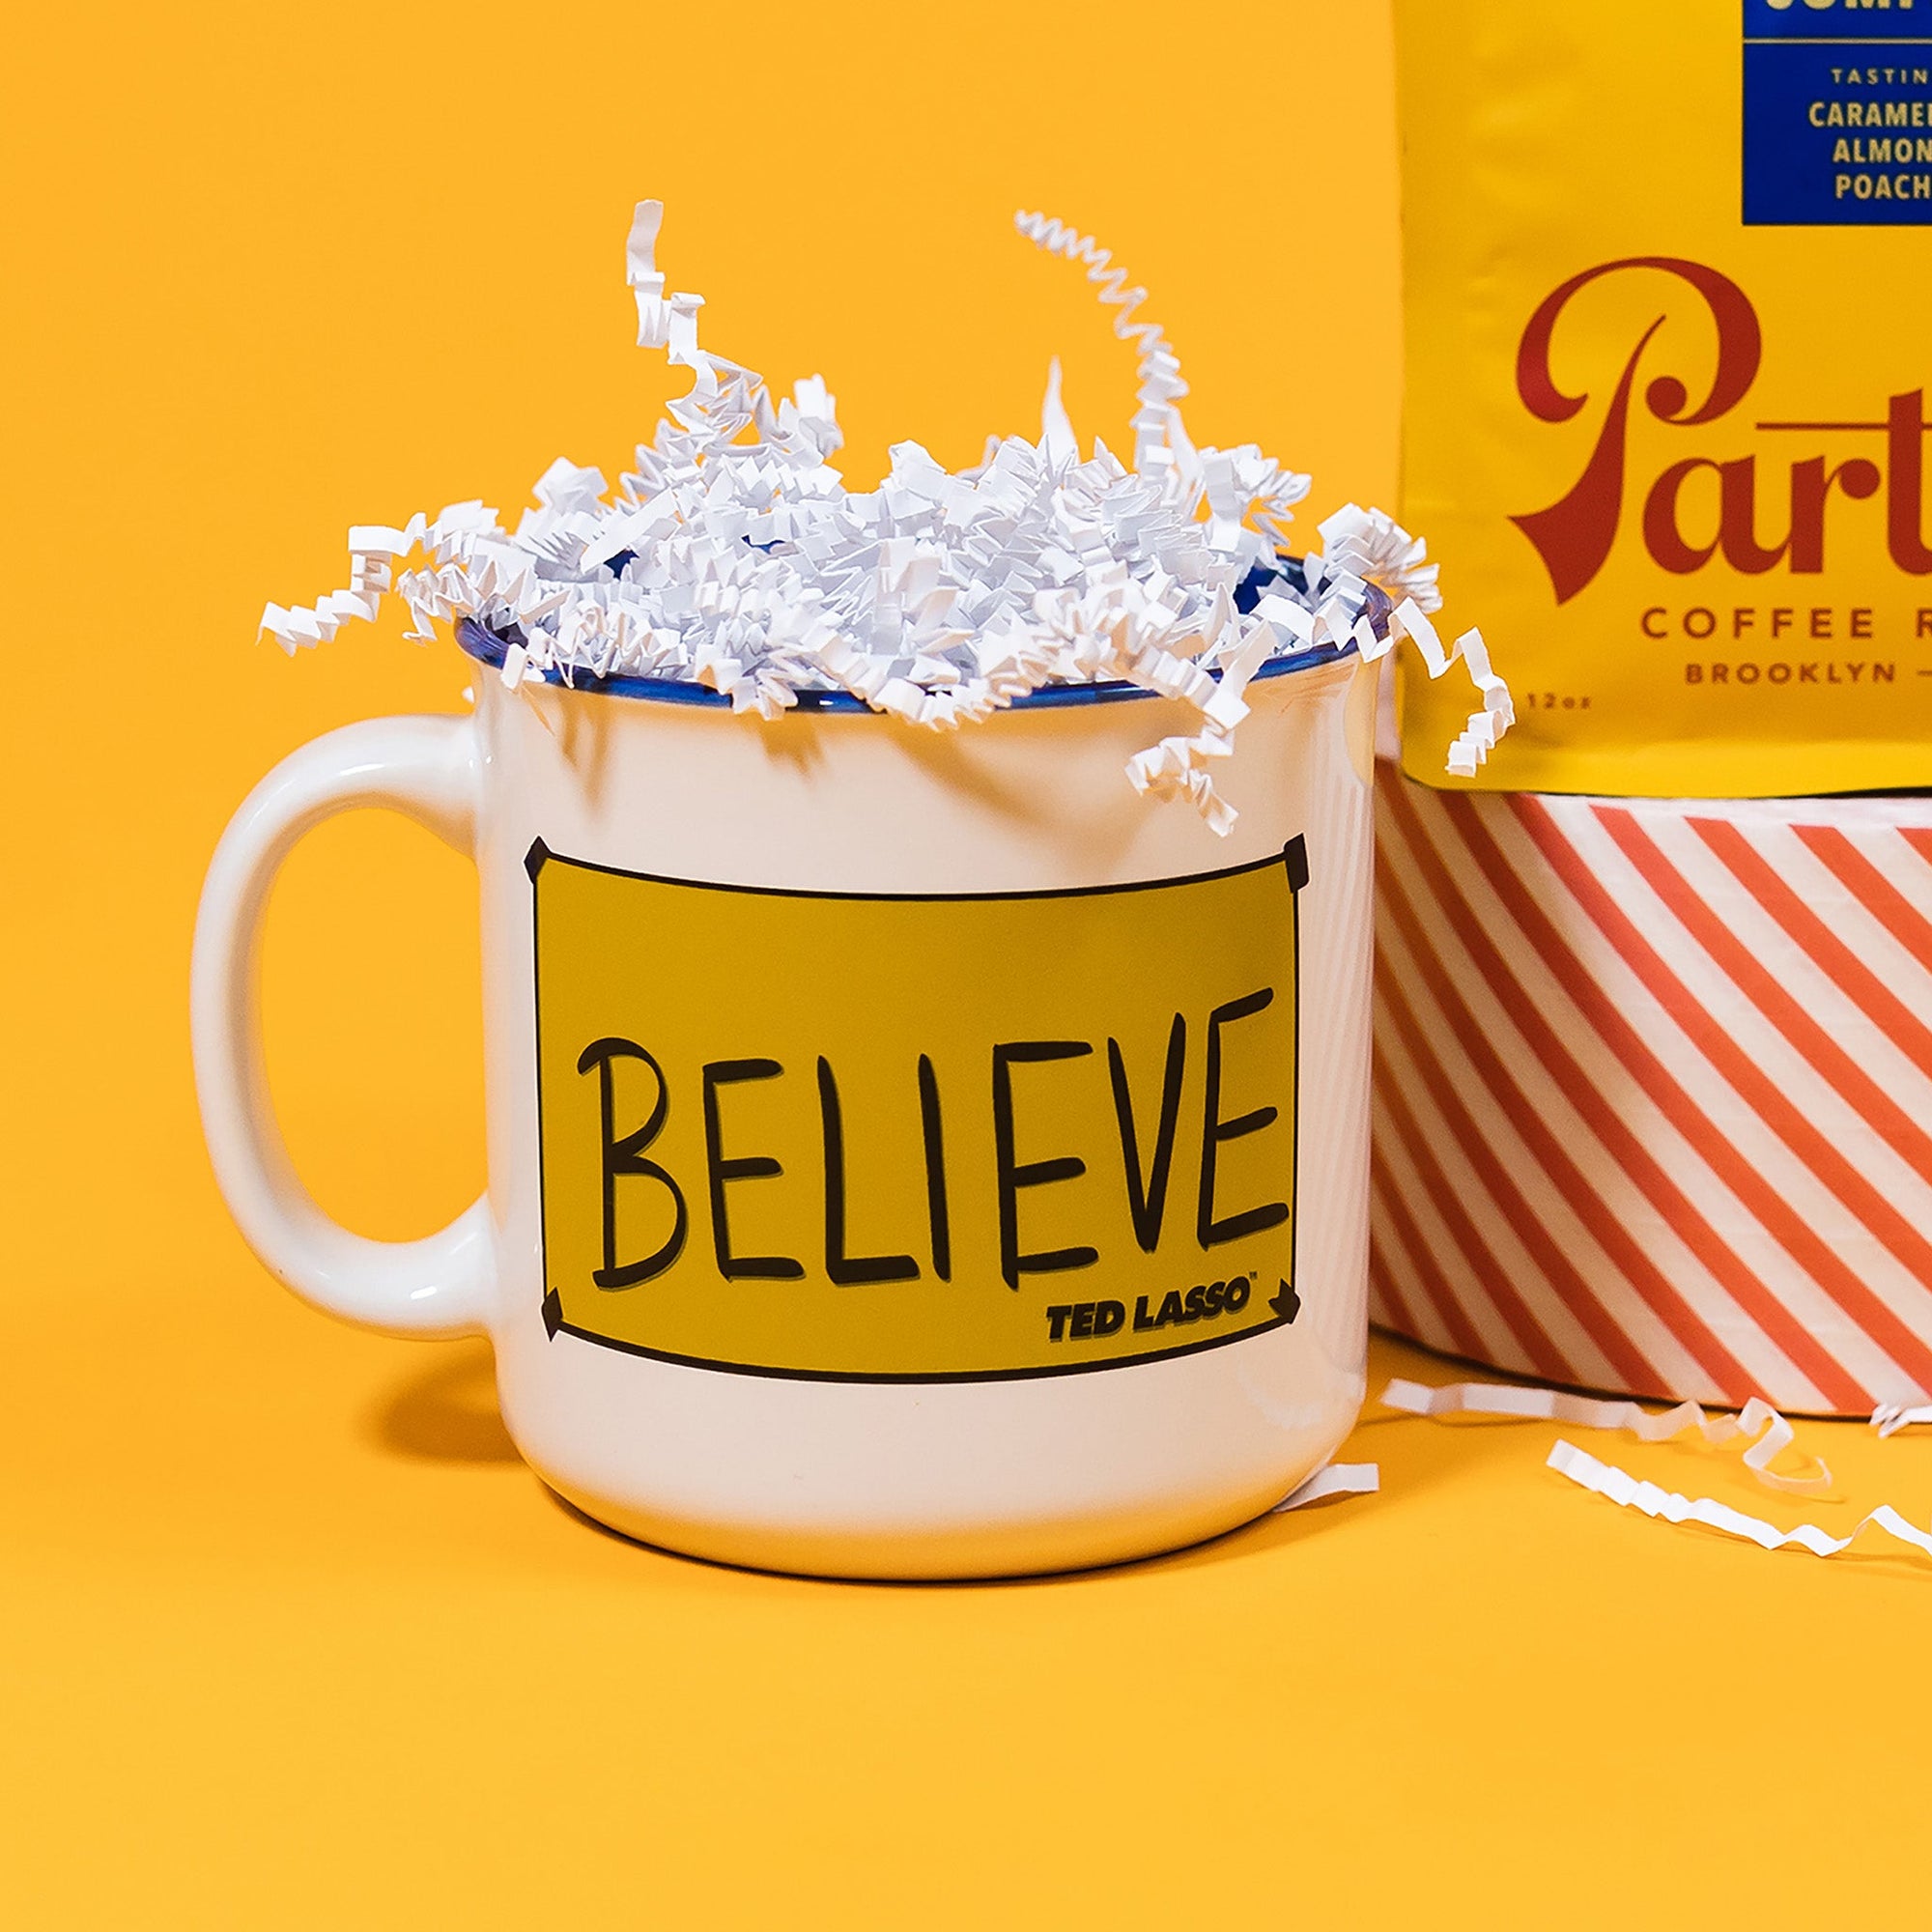 On a sunny mustard background sits a mug with white crinkle in it. This Ted Lasso inspired white mug has a cobalt blue rim and the inside is also cobalt blue. On the front is a sunny mustard yellow rectangle with cobalt blue tape on each corner and it says "BELIEVE" in black, all caps handwritten lettering. It also says "TED LASSO" in all caps bold font.